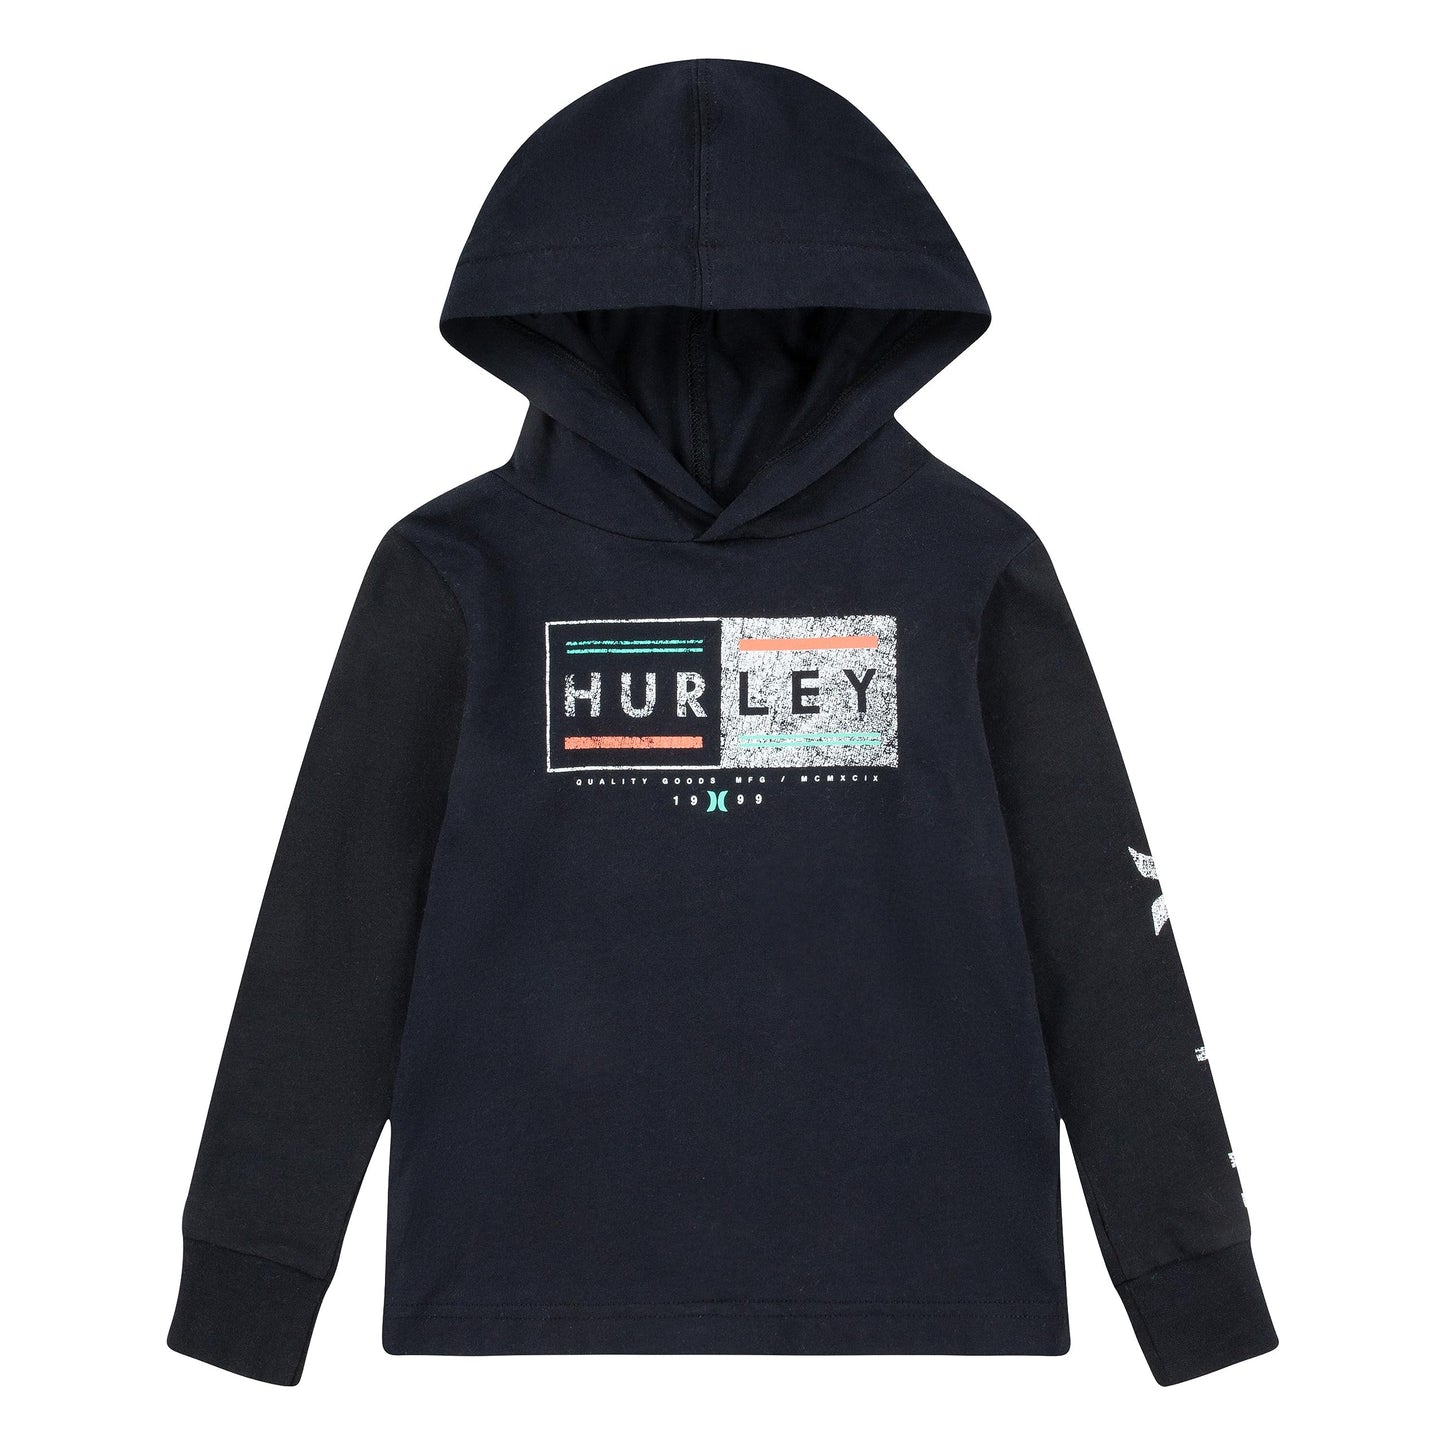 Image 1 of Long Sleeve Graphic Hooded Top (Little Kids)